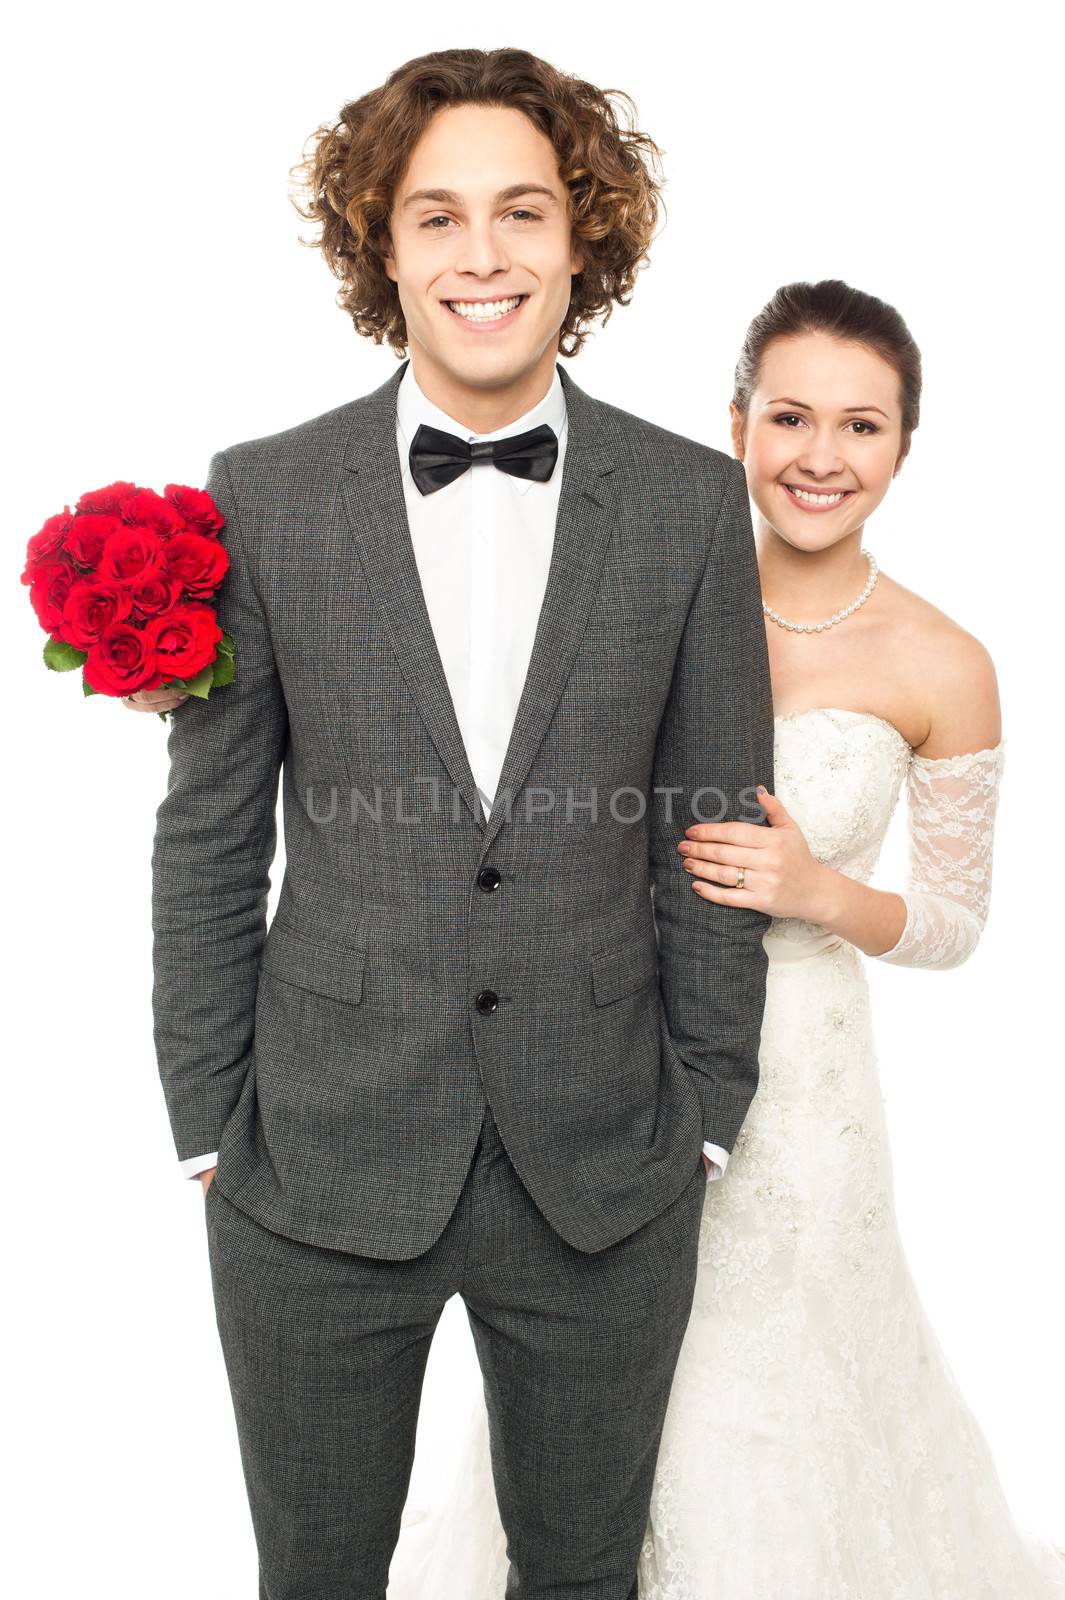 Studio shot of a newlywed couple by stockyimages